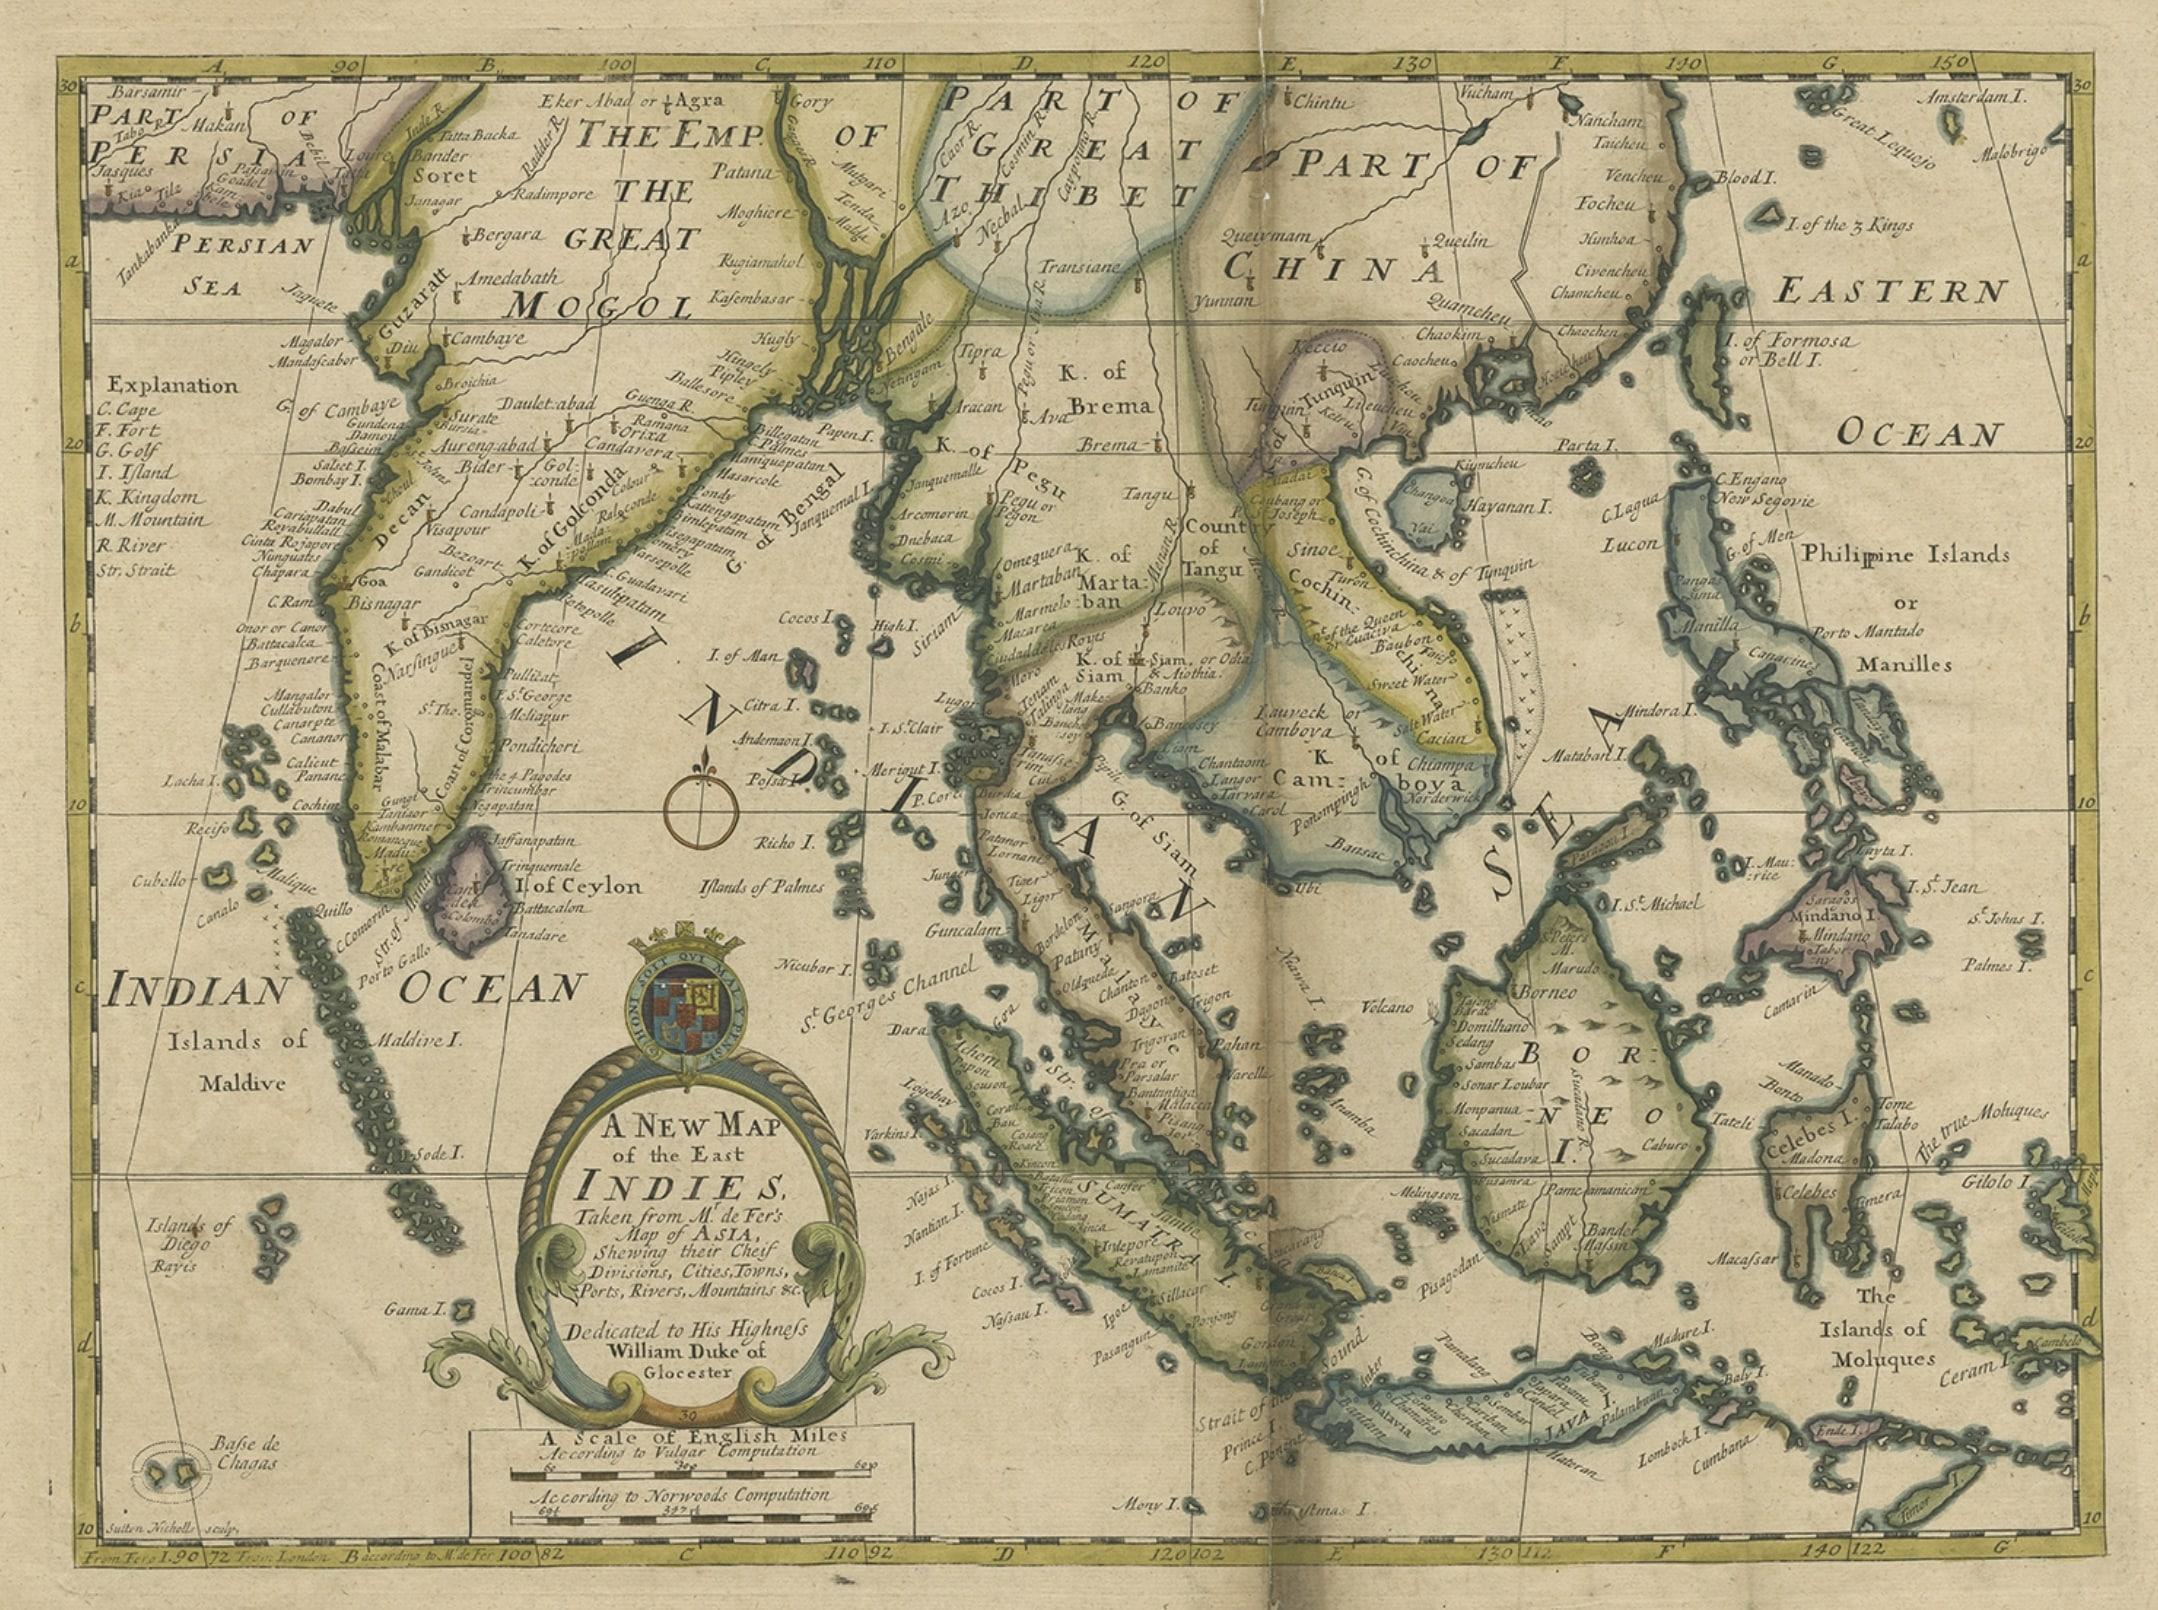 Antique map titled 'A New Map of the East Indies'. 

Old map covering all of Southeast Asia from Persia to the Timor Island, inclusive of the modern day nations of India, Ceylon, Thailand, Burma (Myanmar), Malaysia, Cambodia, Vietnam, Laos,